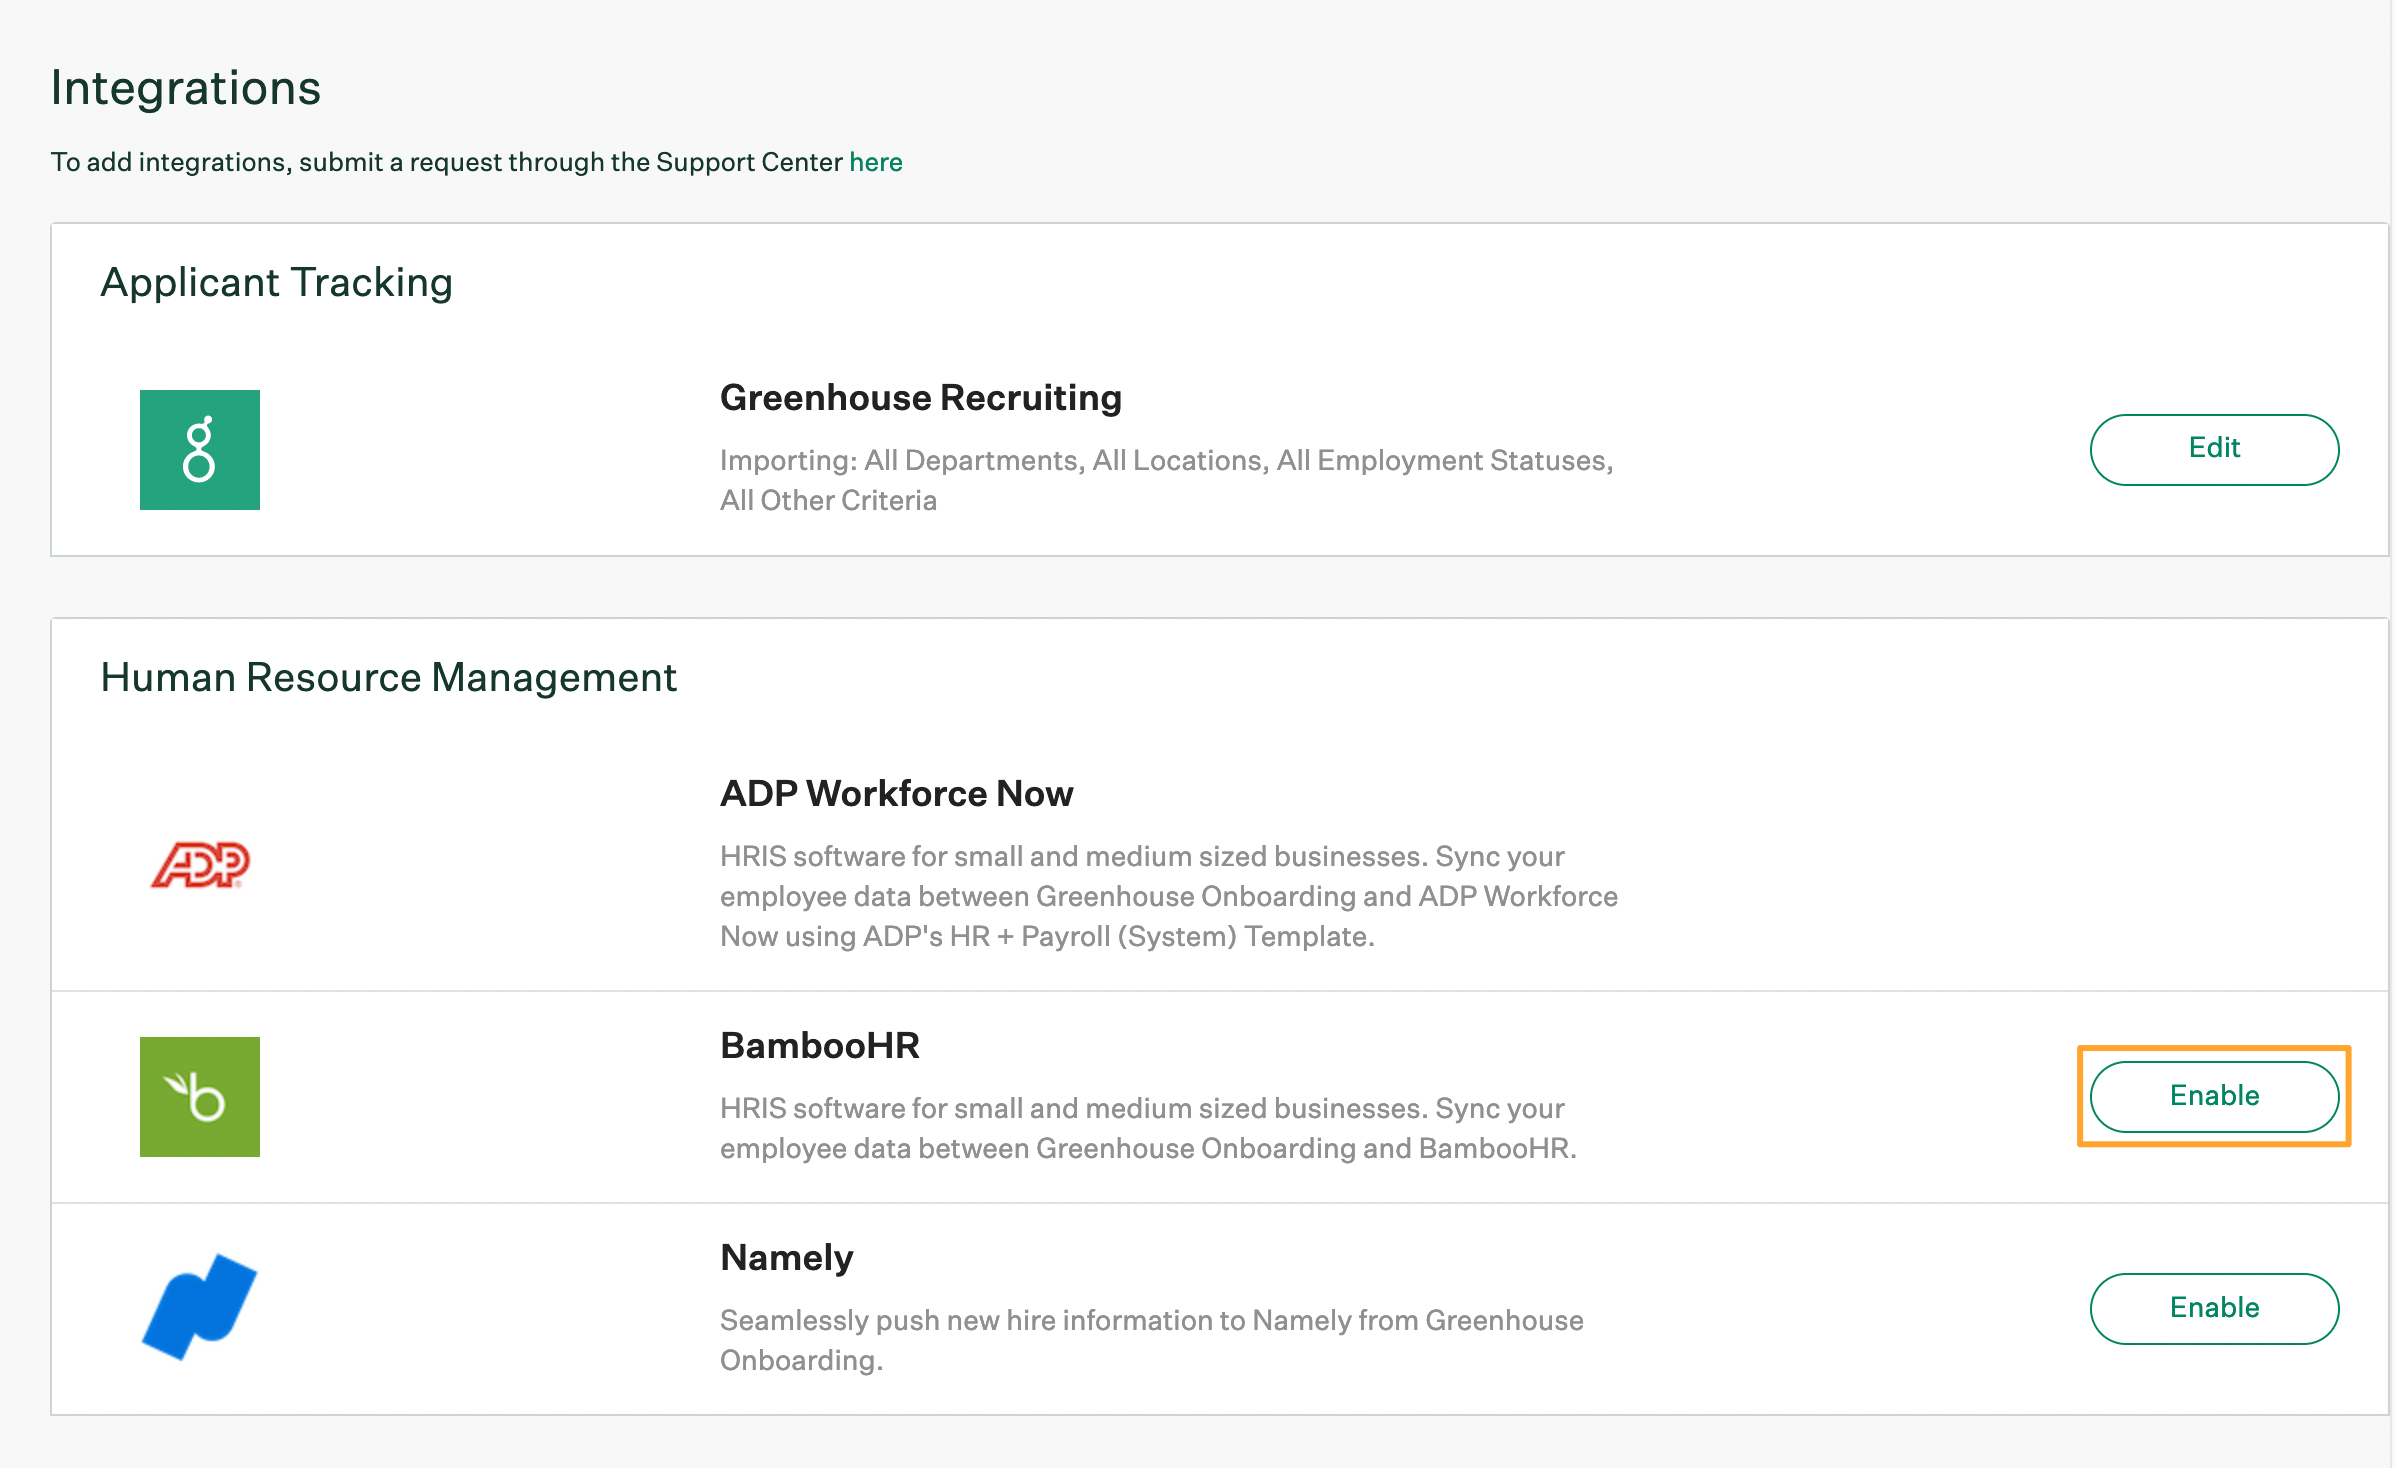 Greenhouse Onboarding Integrations page with Enable button for BambooHR highlighted